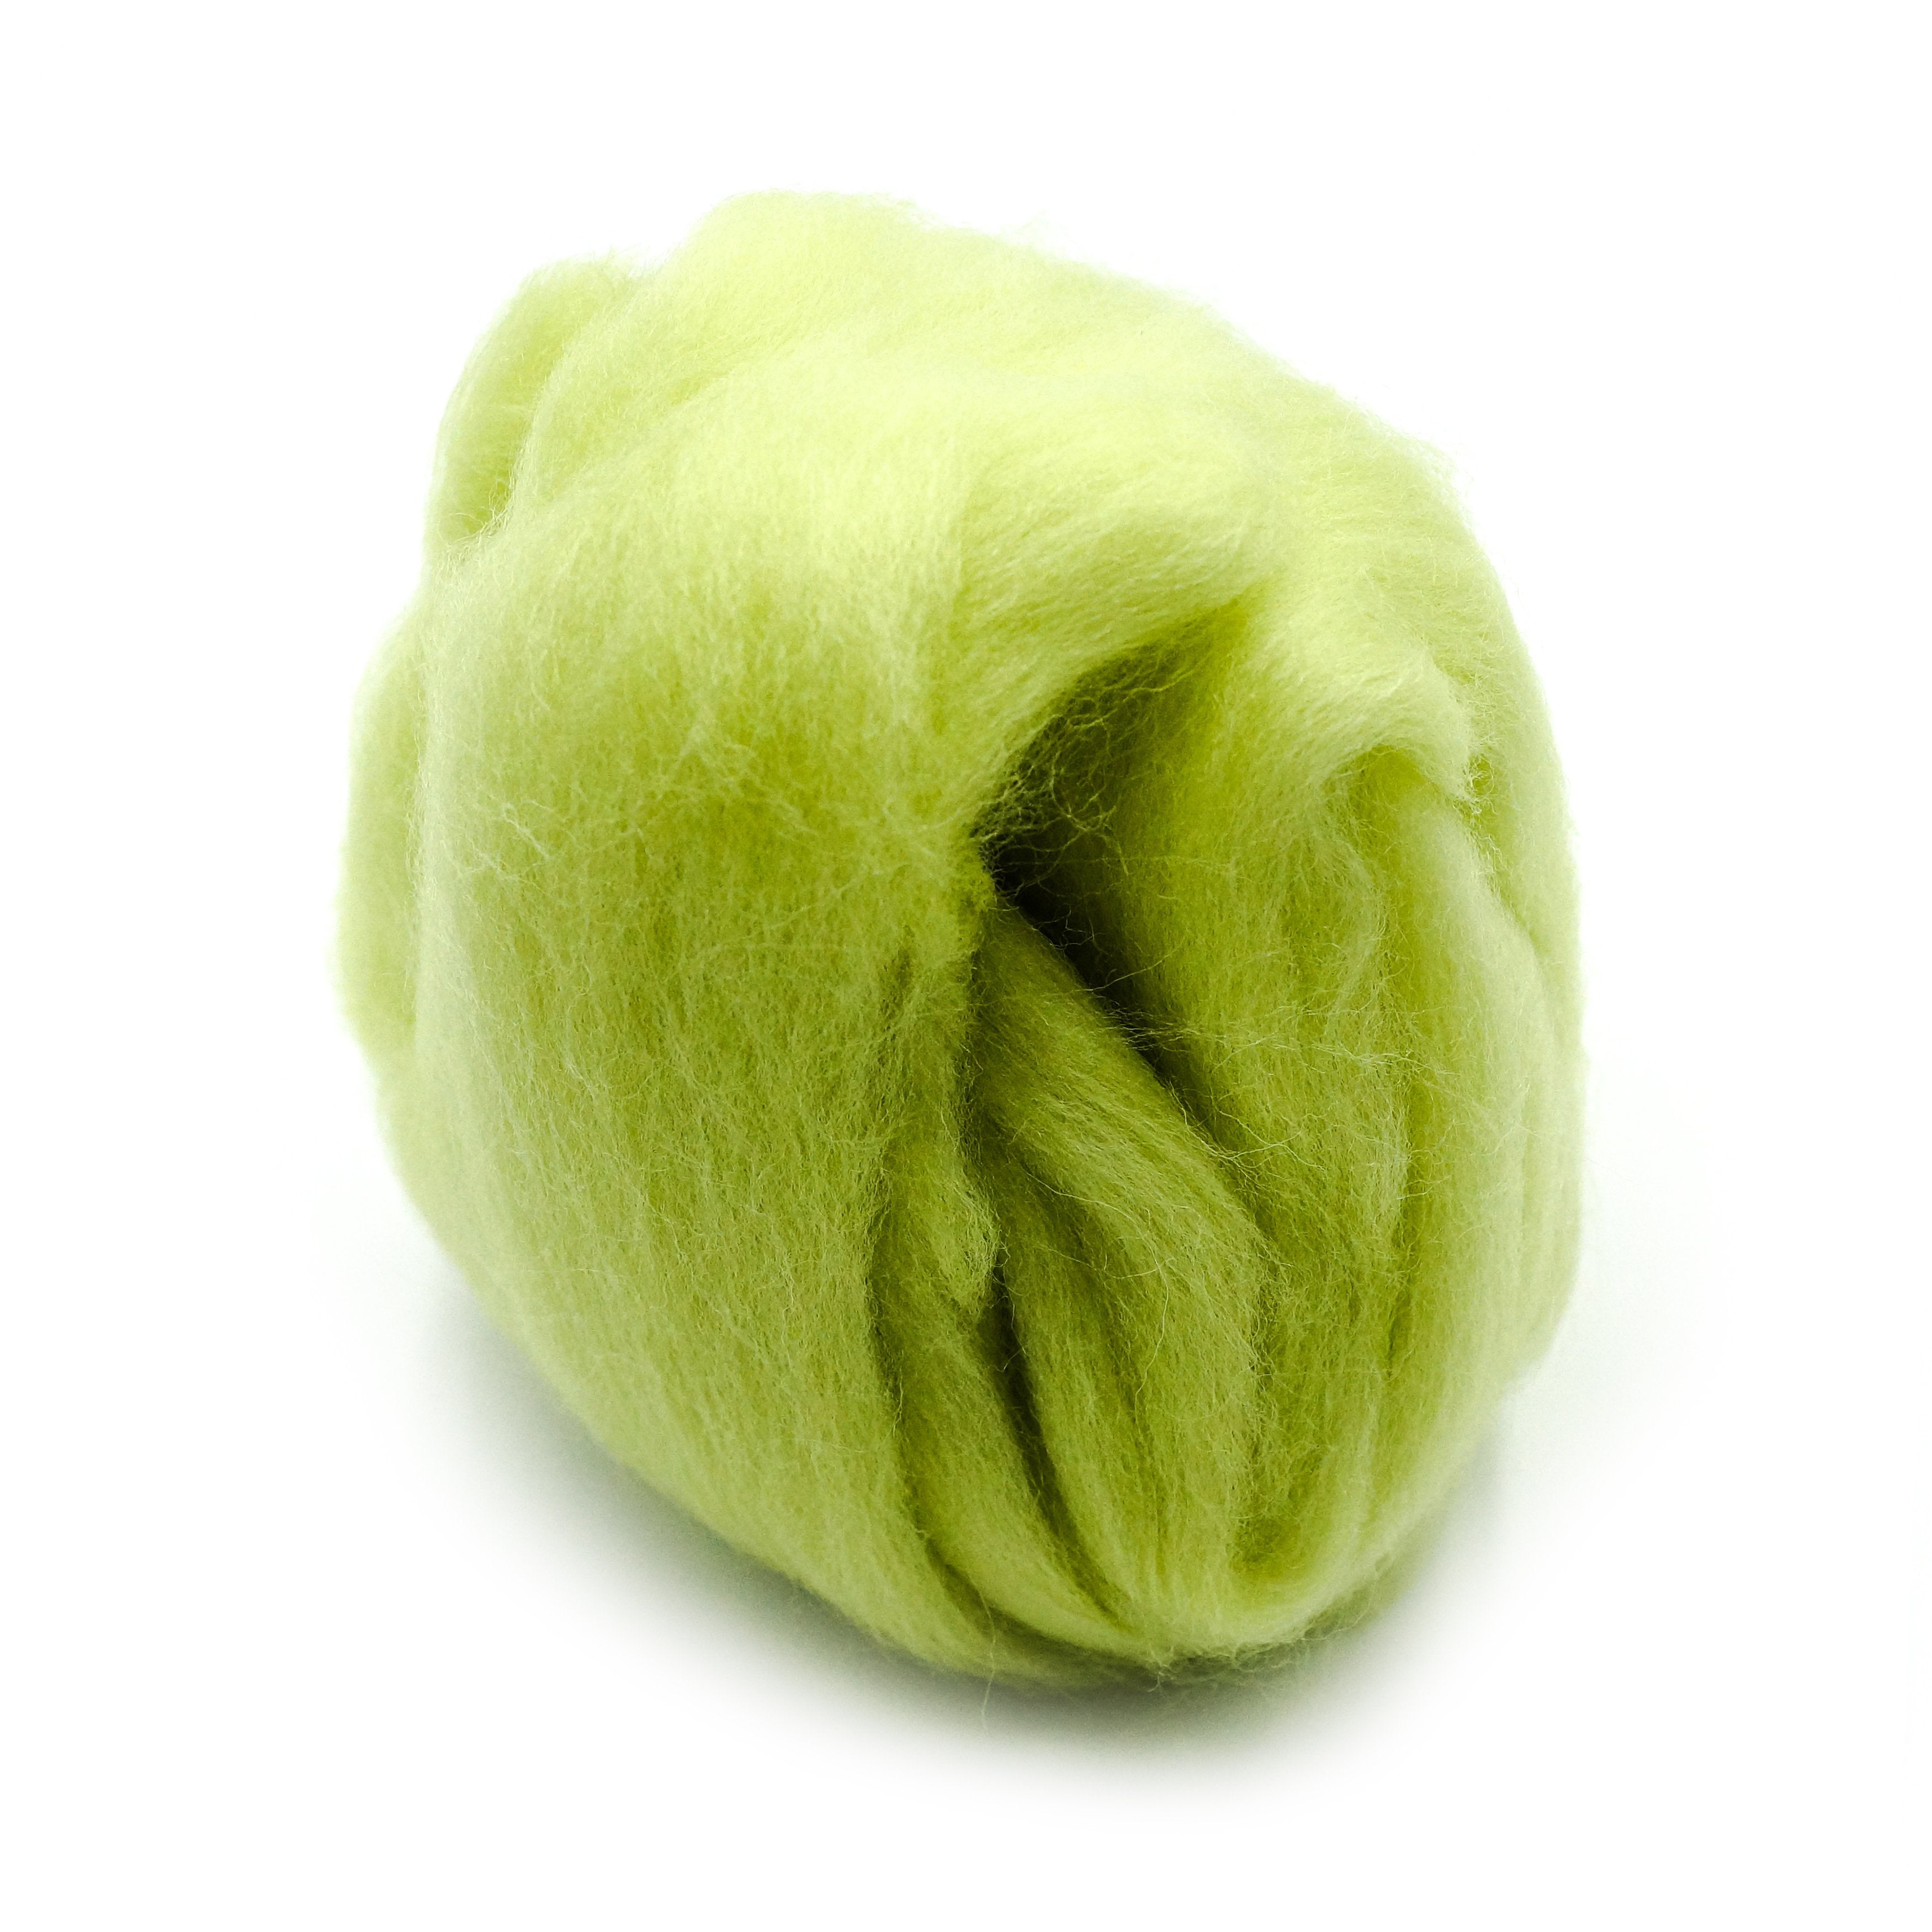 CLV - Natural Wool Roving (Lime Green)